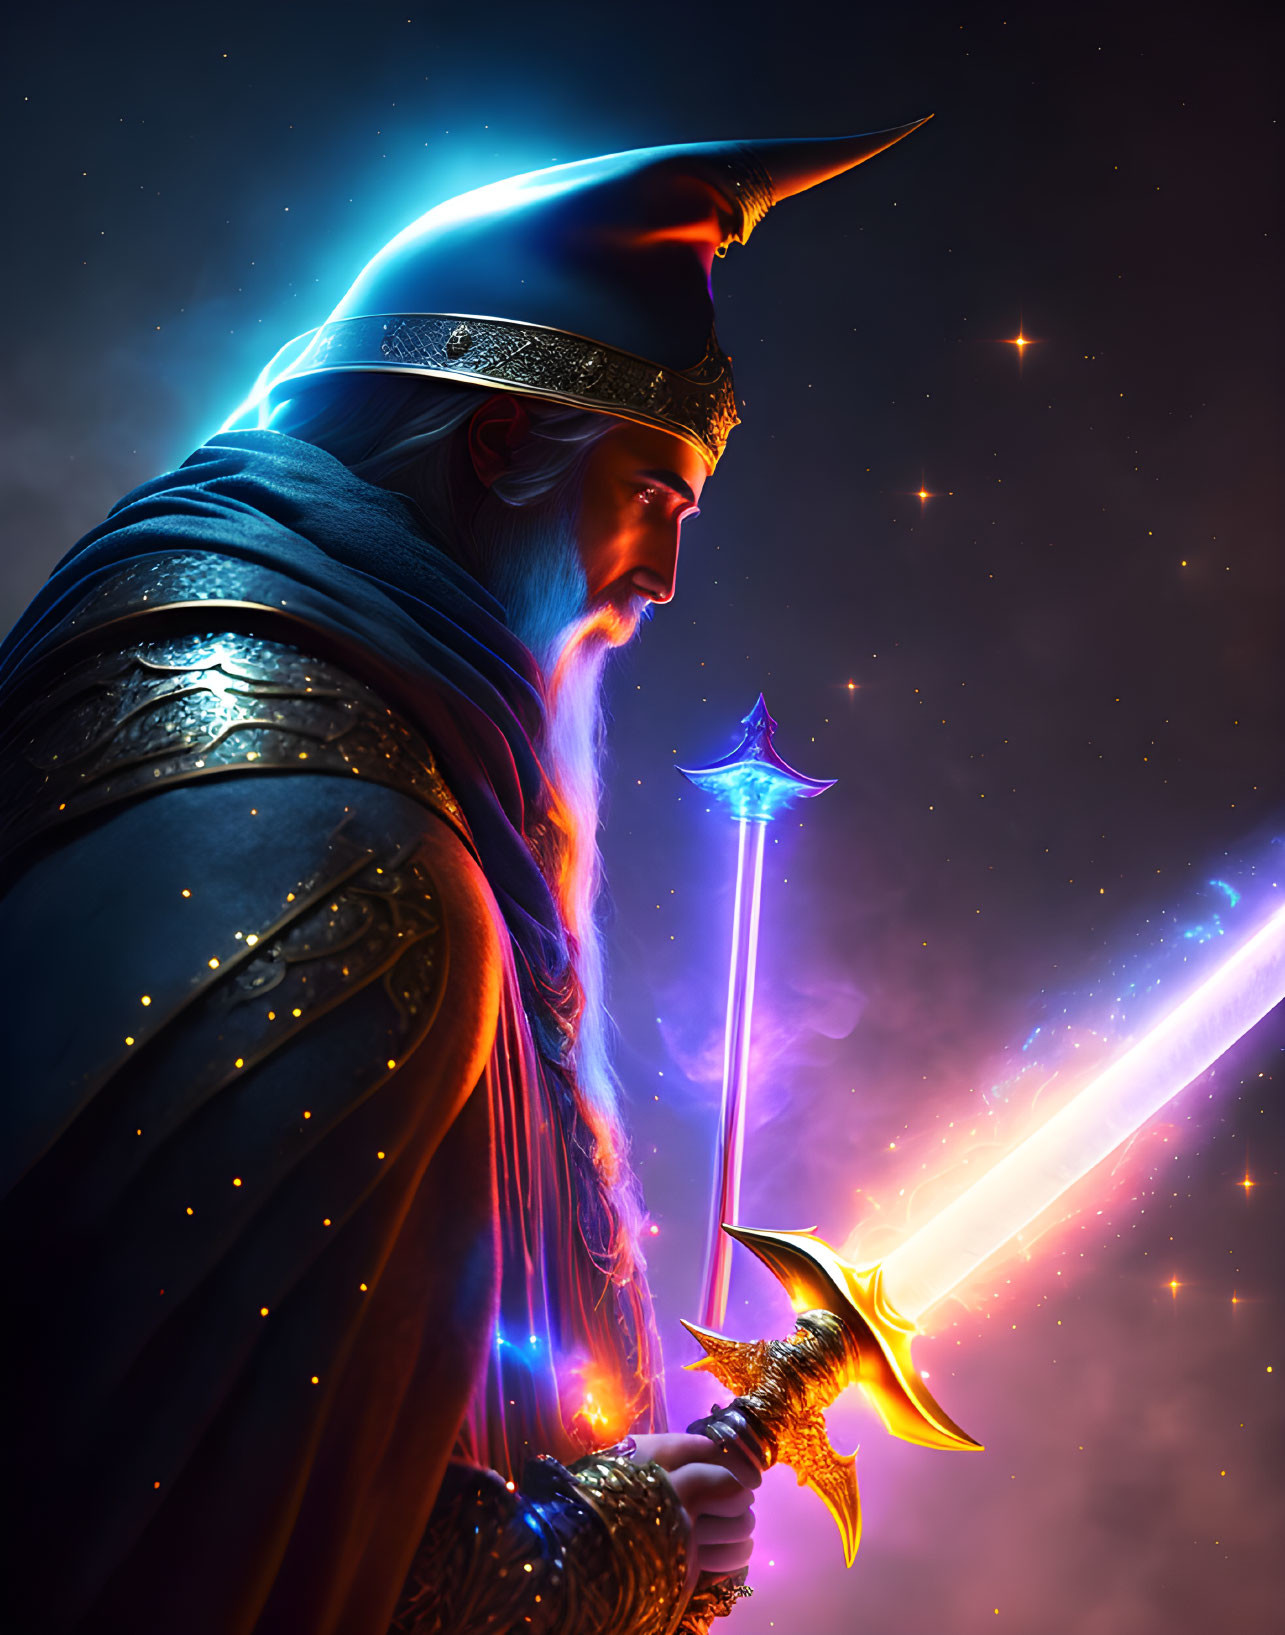 Majestic wizard in ornate armor with luminous staff in starry backdrop